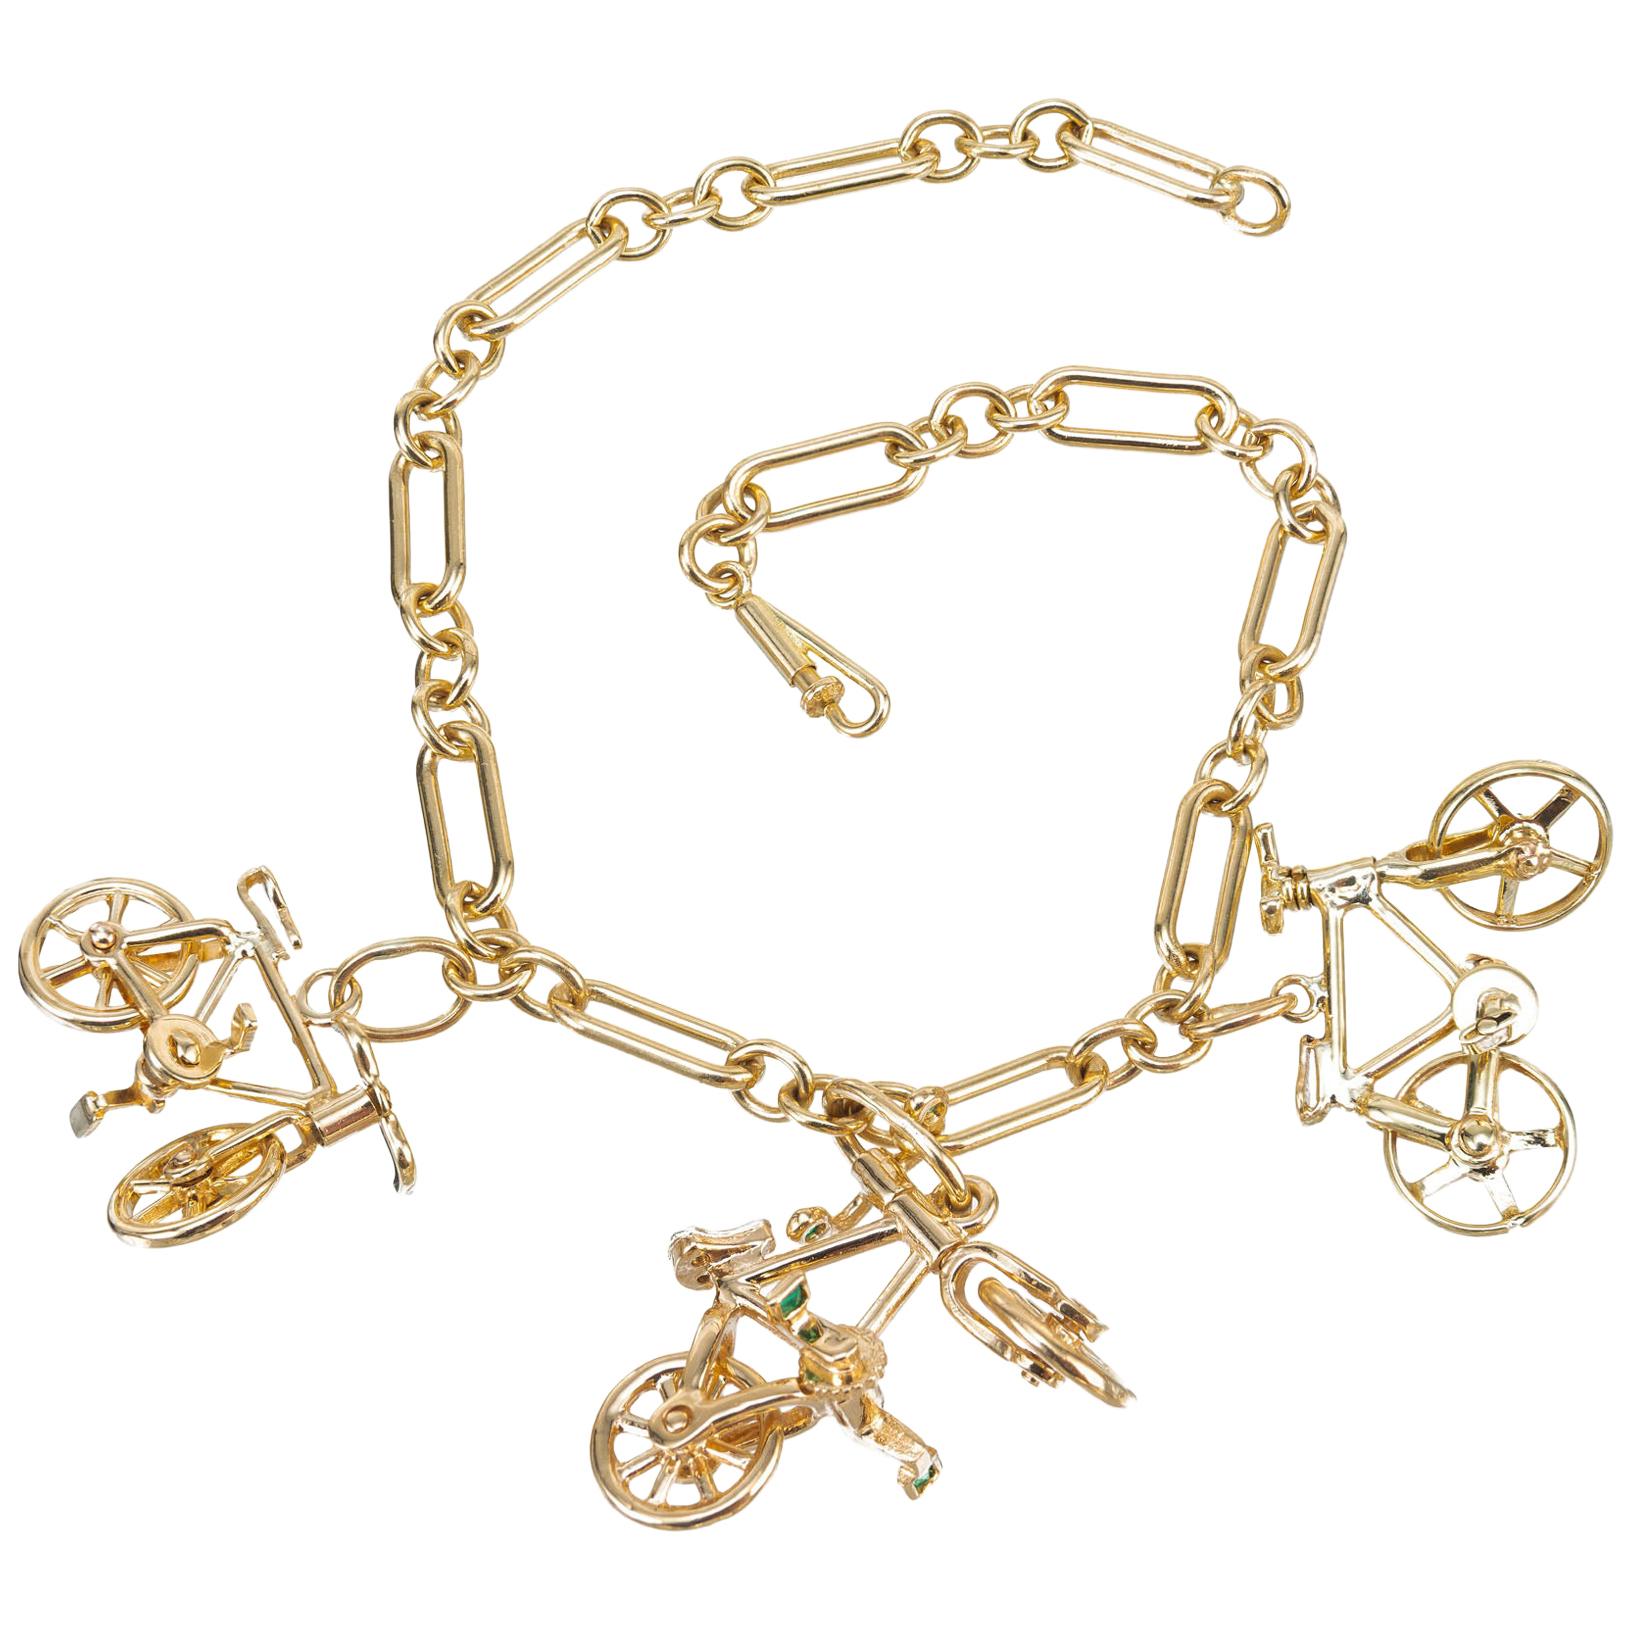 .02 Carat Diamond Emerald Yellow Gold Bicycle Themed Charm Bracelet For Sale